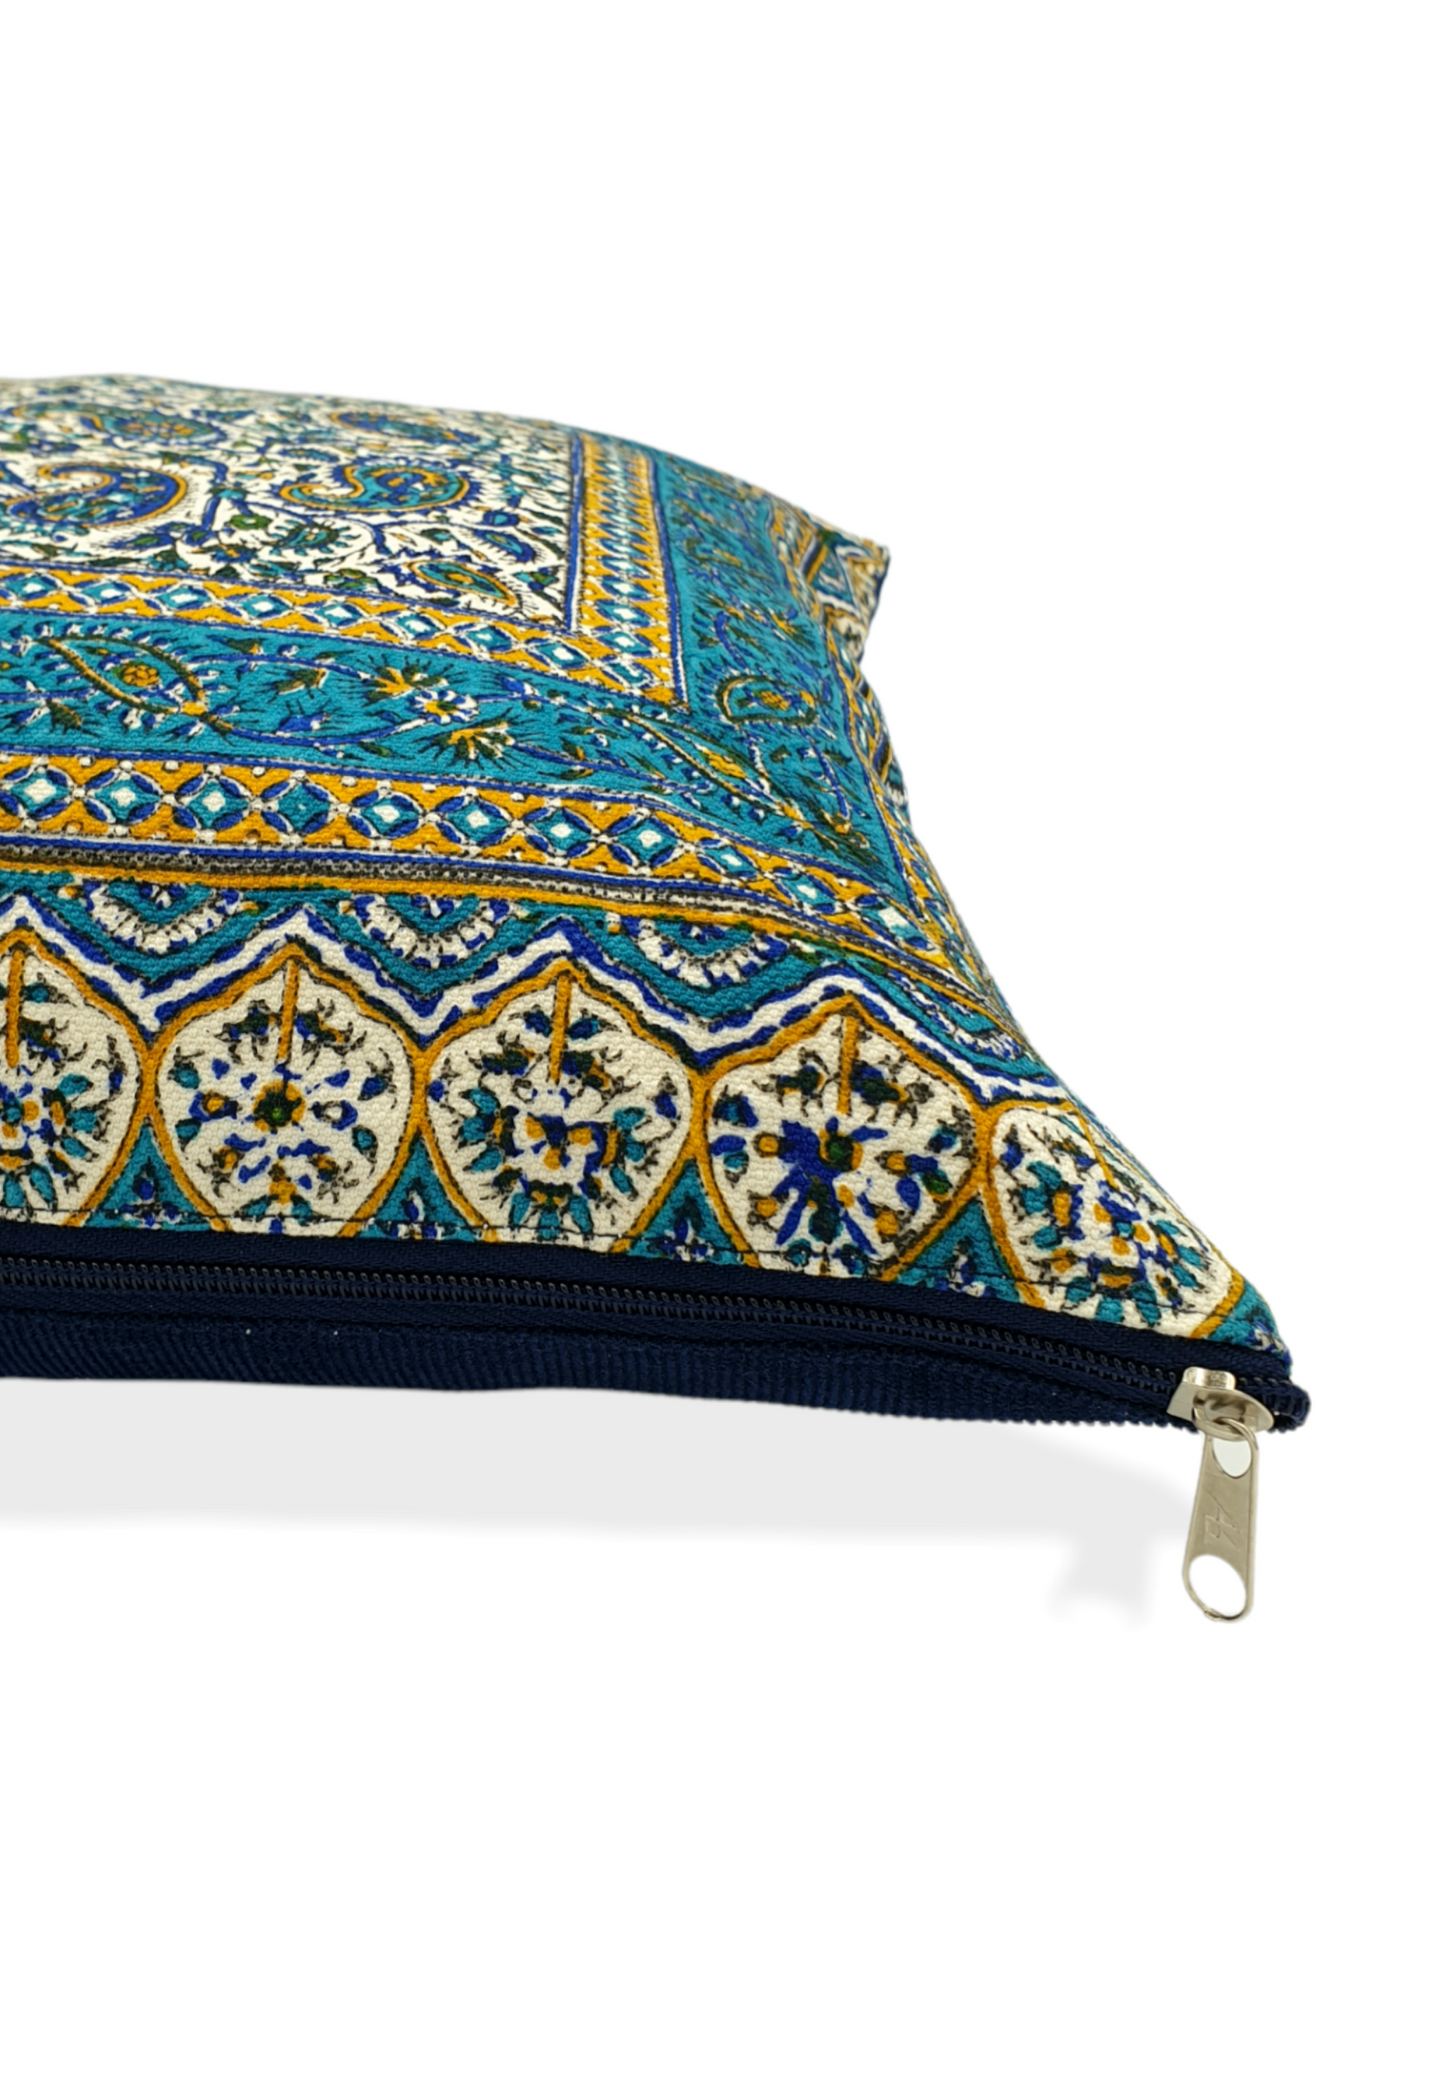 AFROZAN Hand-printed Cushion Cover - Peisly Blue